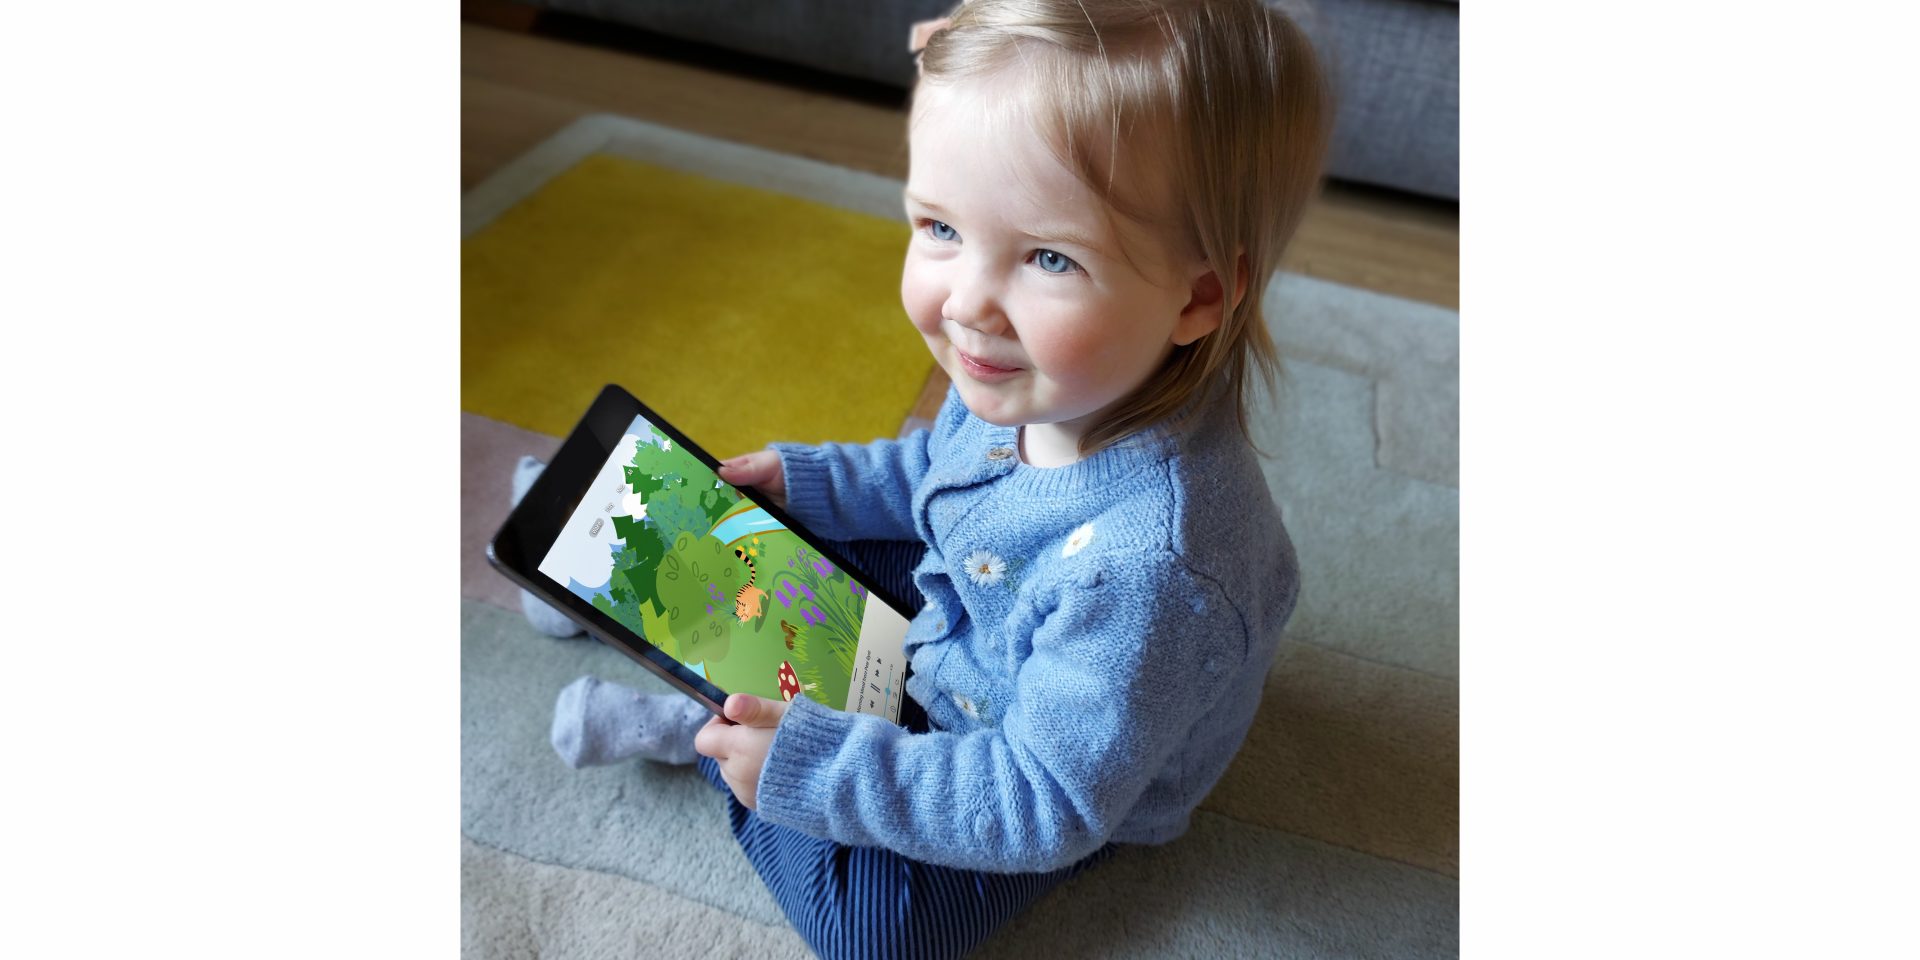 RSNO relaunches Astar app for babies and families